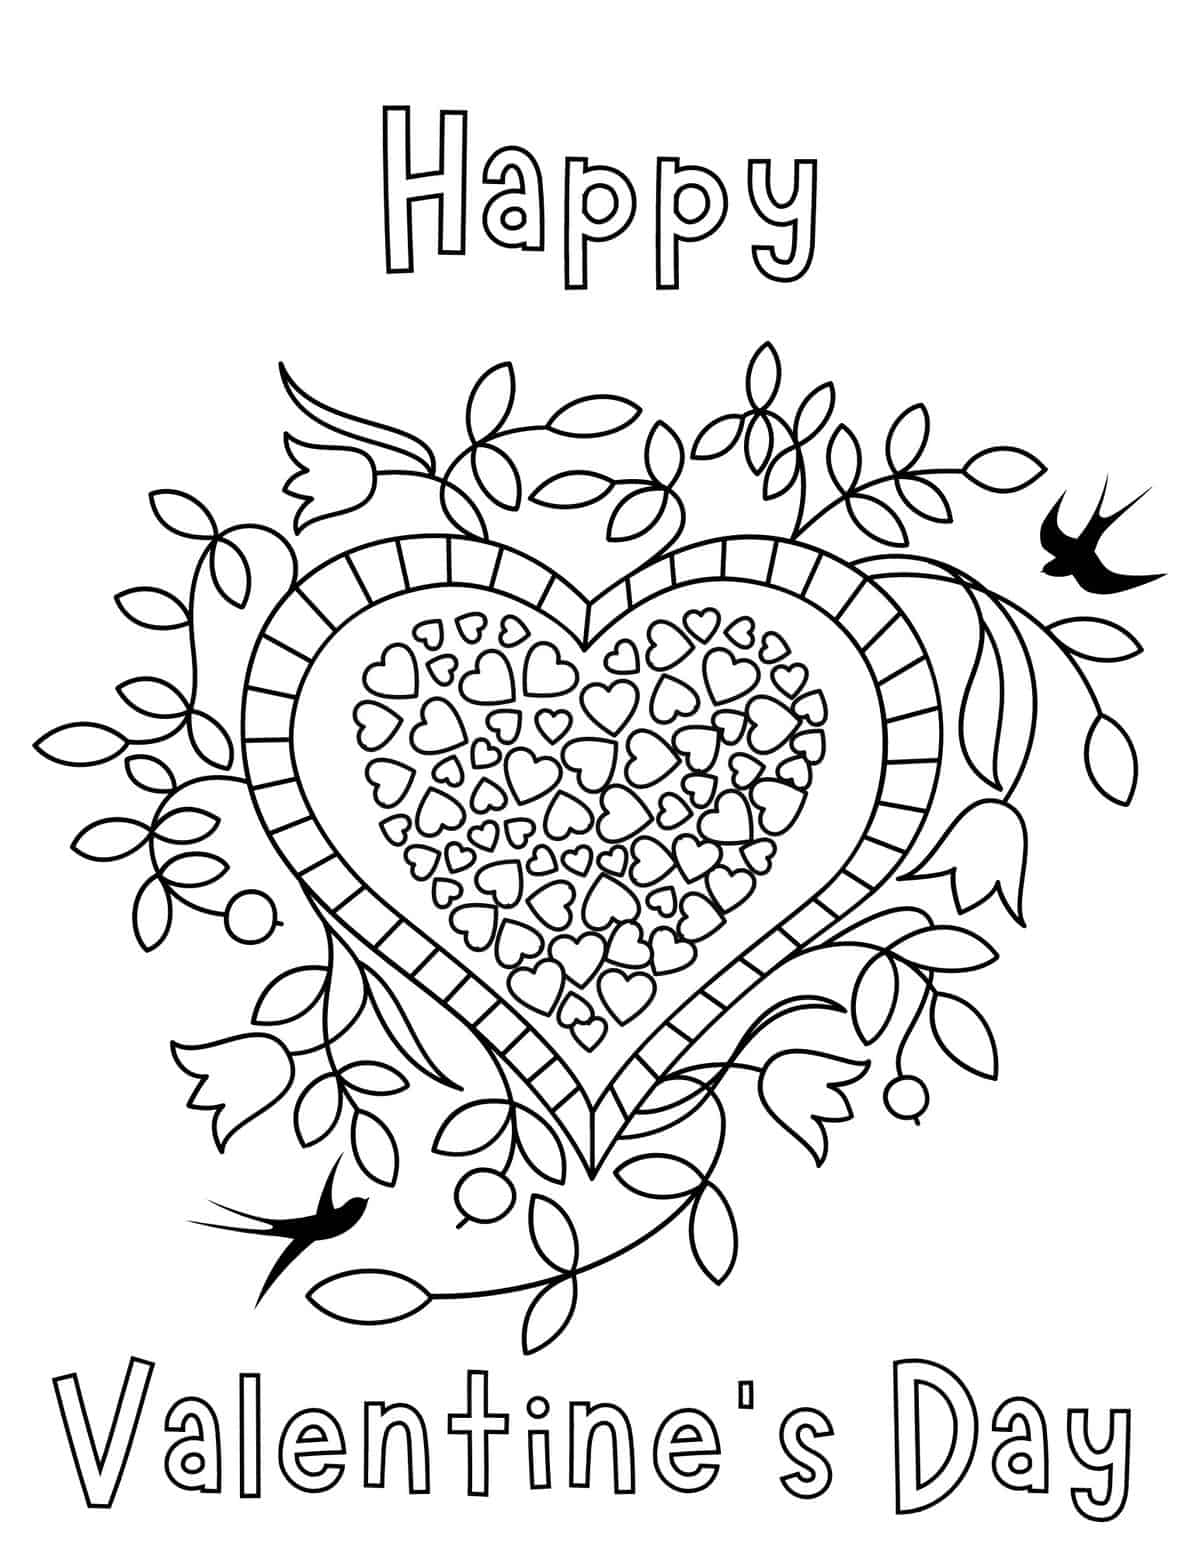 Valentine's Day coloring page with intricate heart design